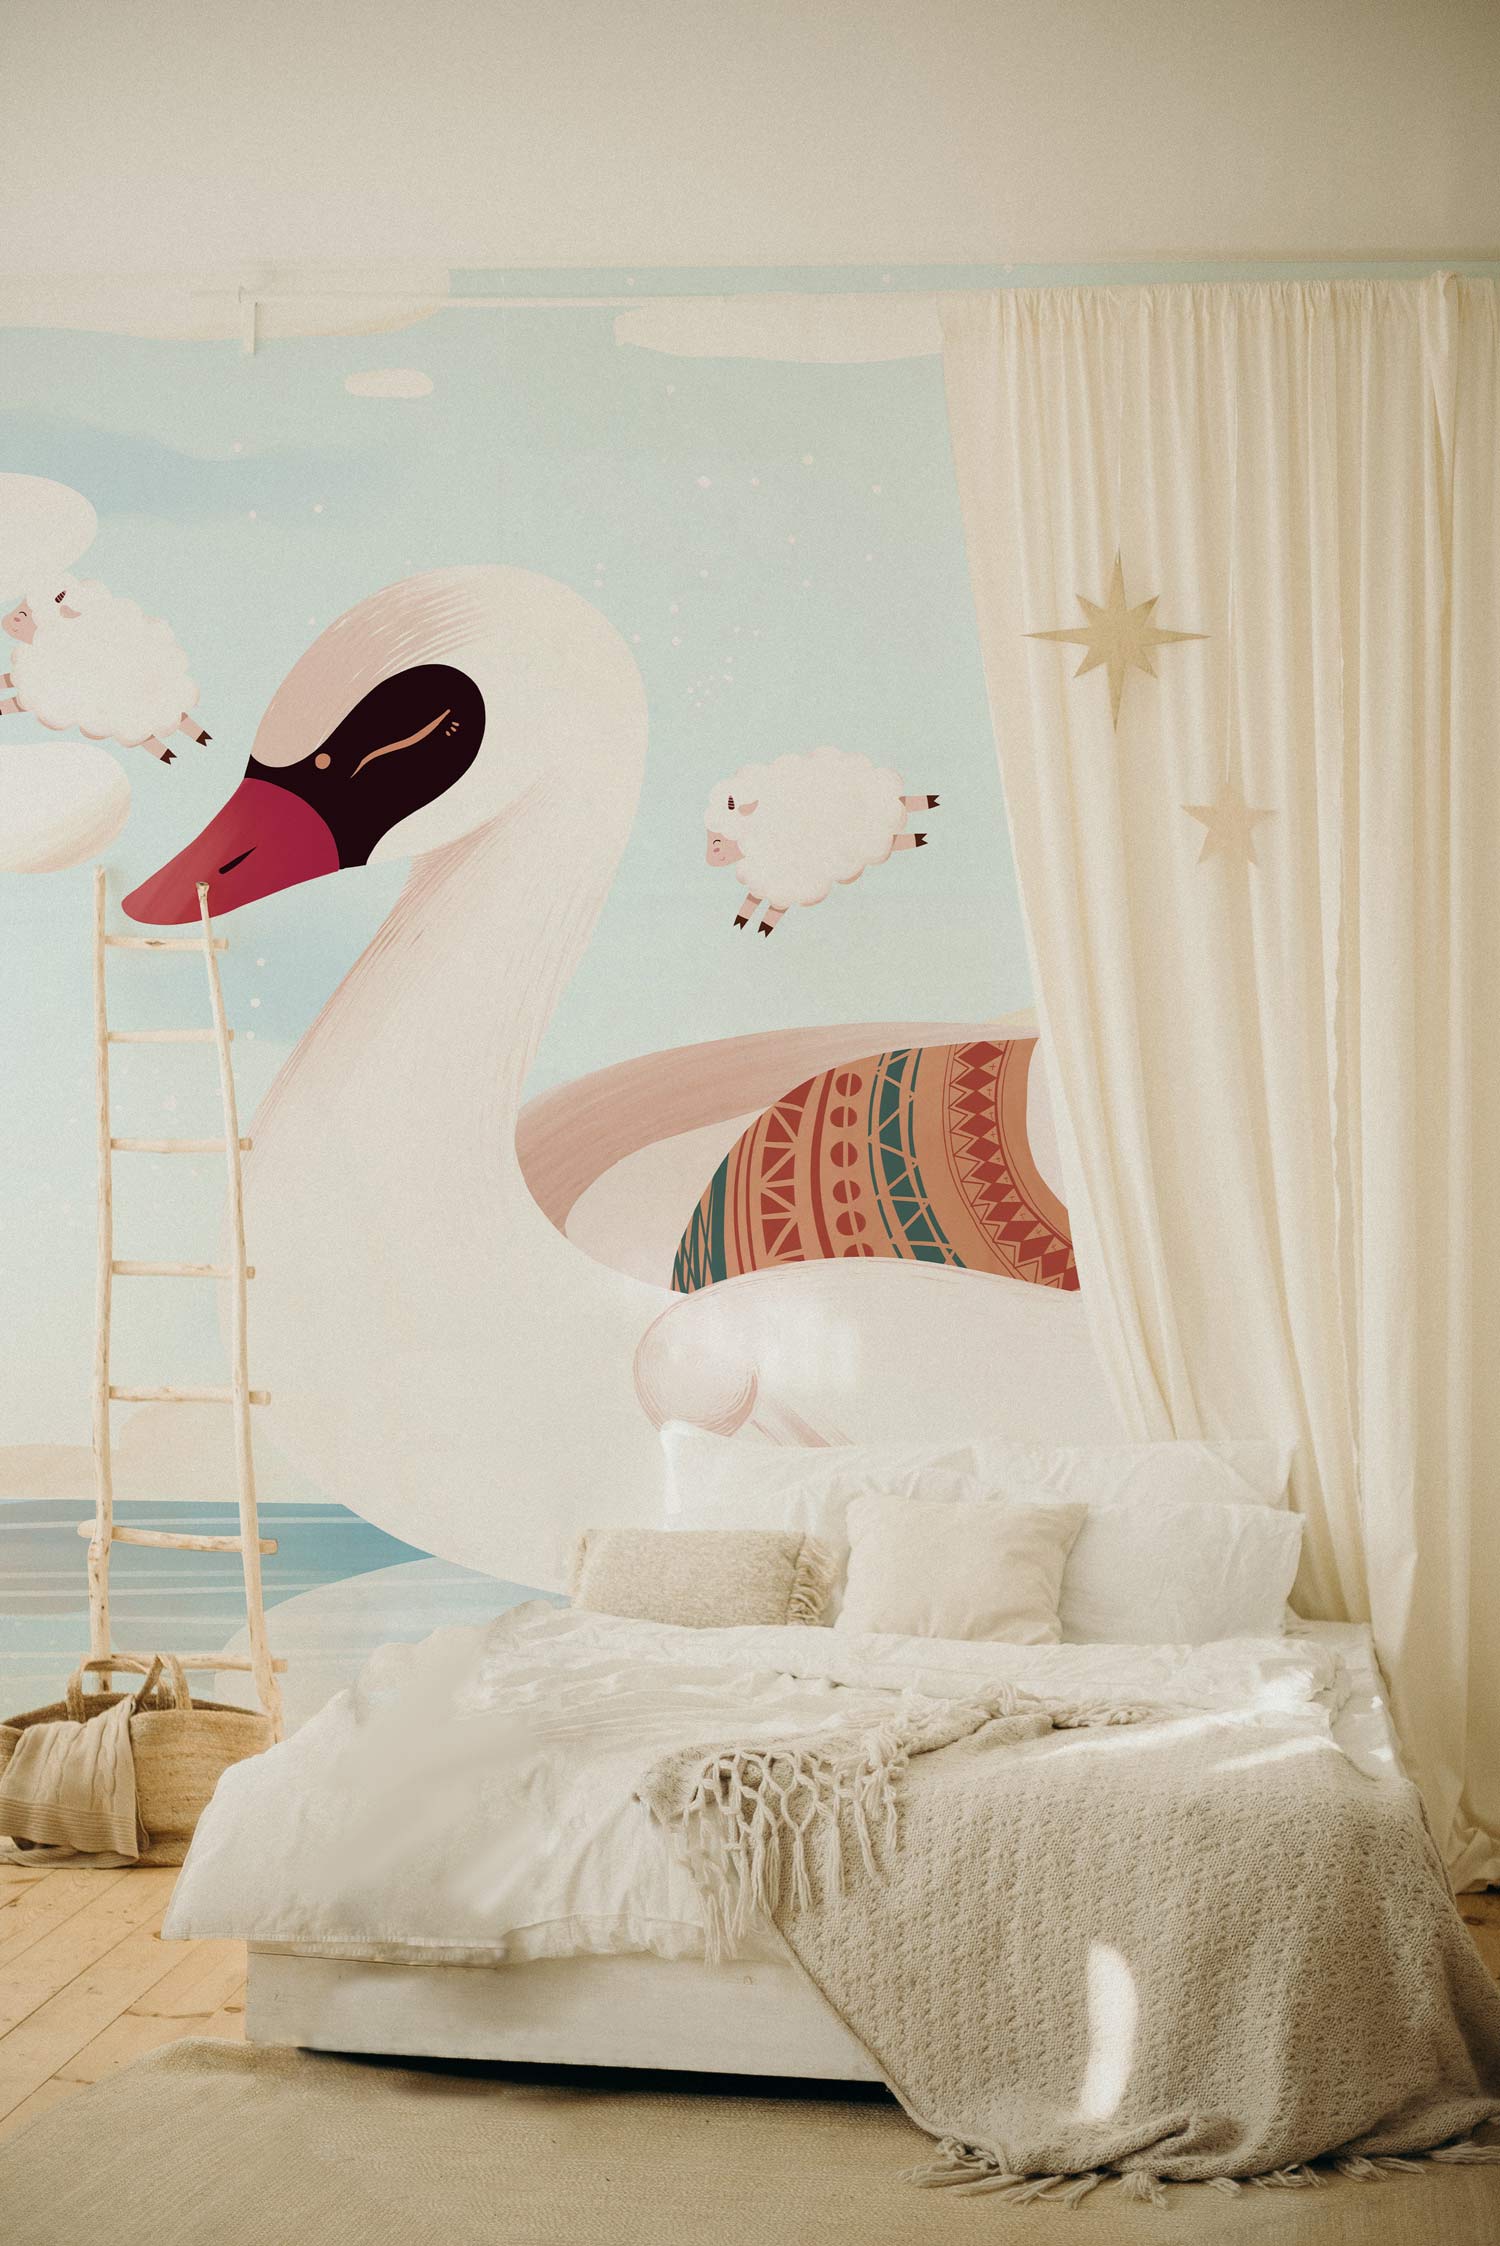 Wallpaper mural with sleeping animals, perfect for use as a nursery decoration.